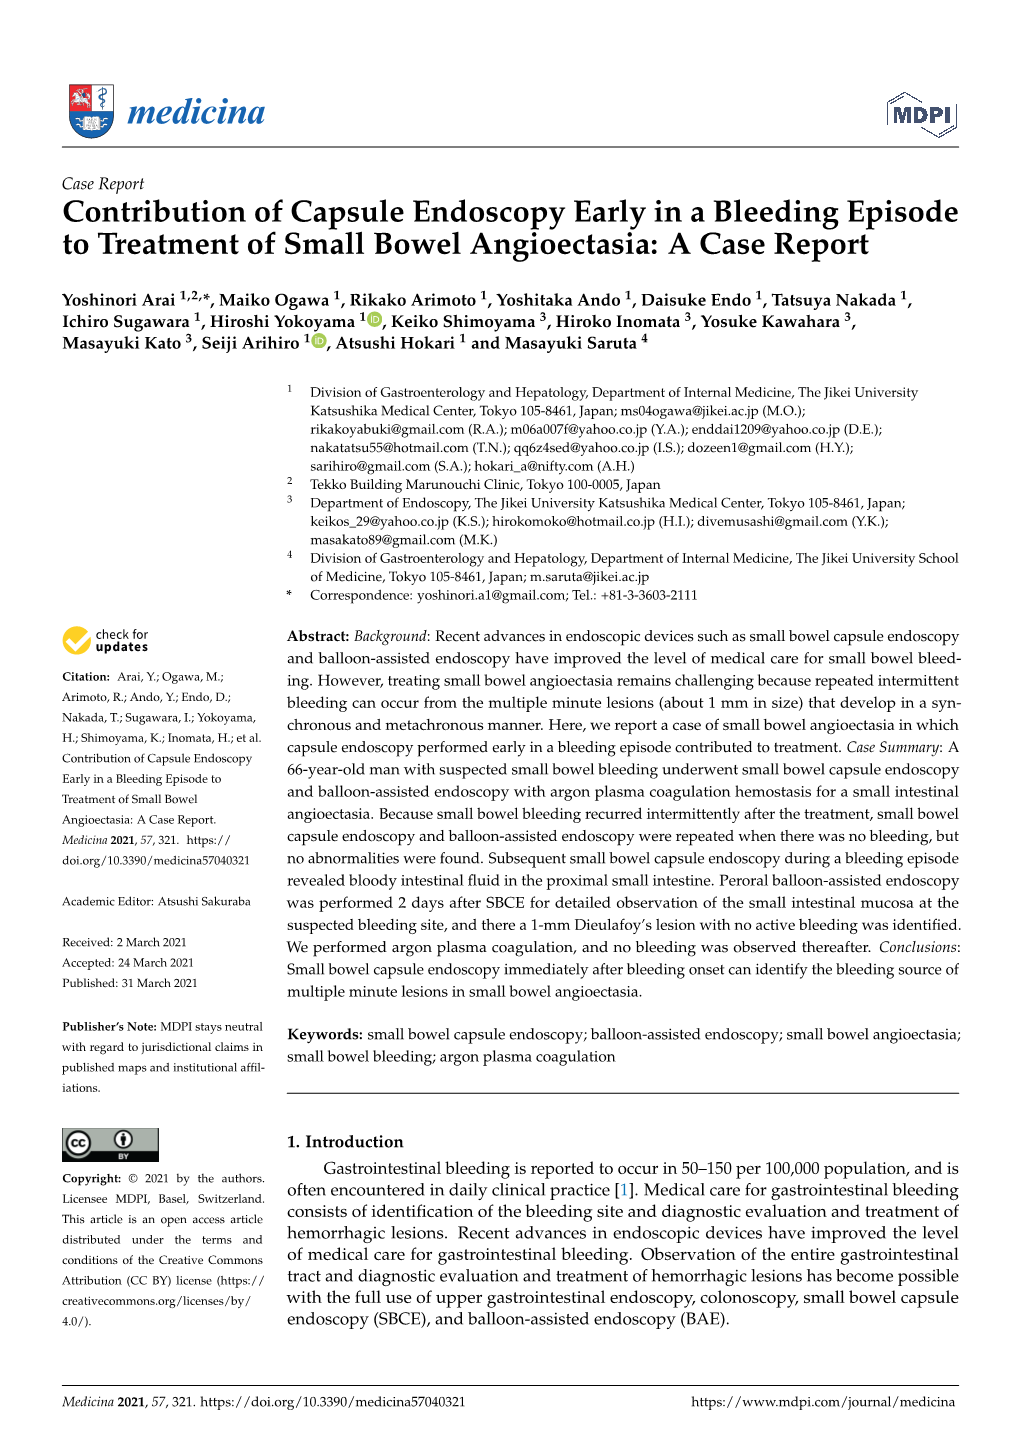 Contribution of Capsule Endoscopy Early in a Bleeding Episode to Treatment of Small Bowel Angioectasia: a Case Report